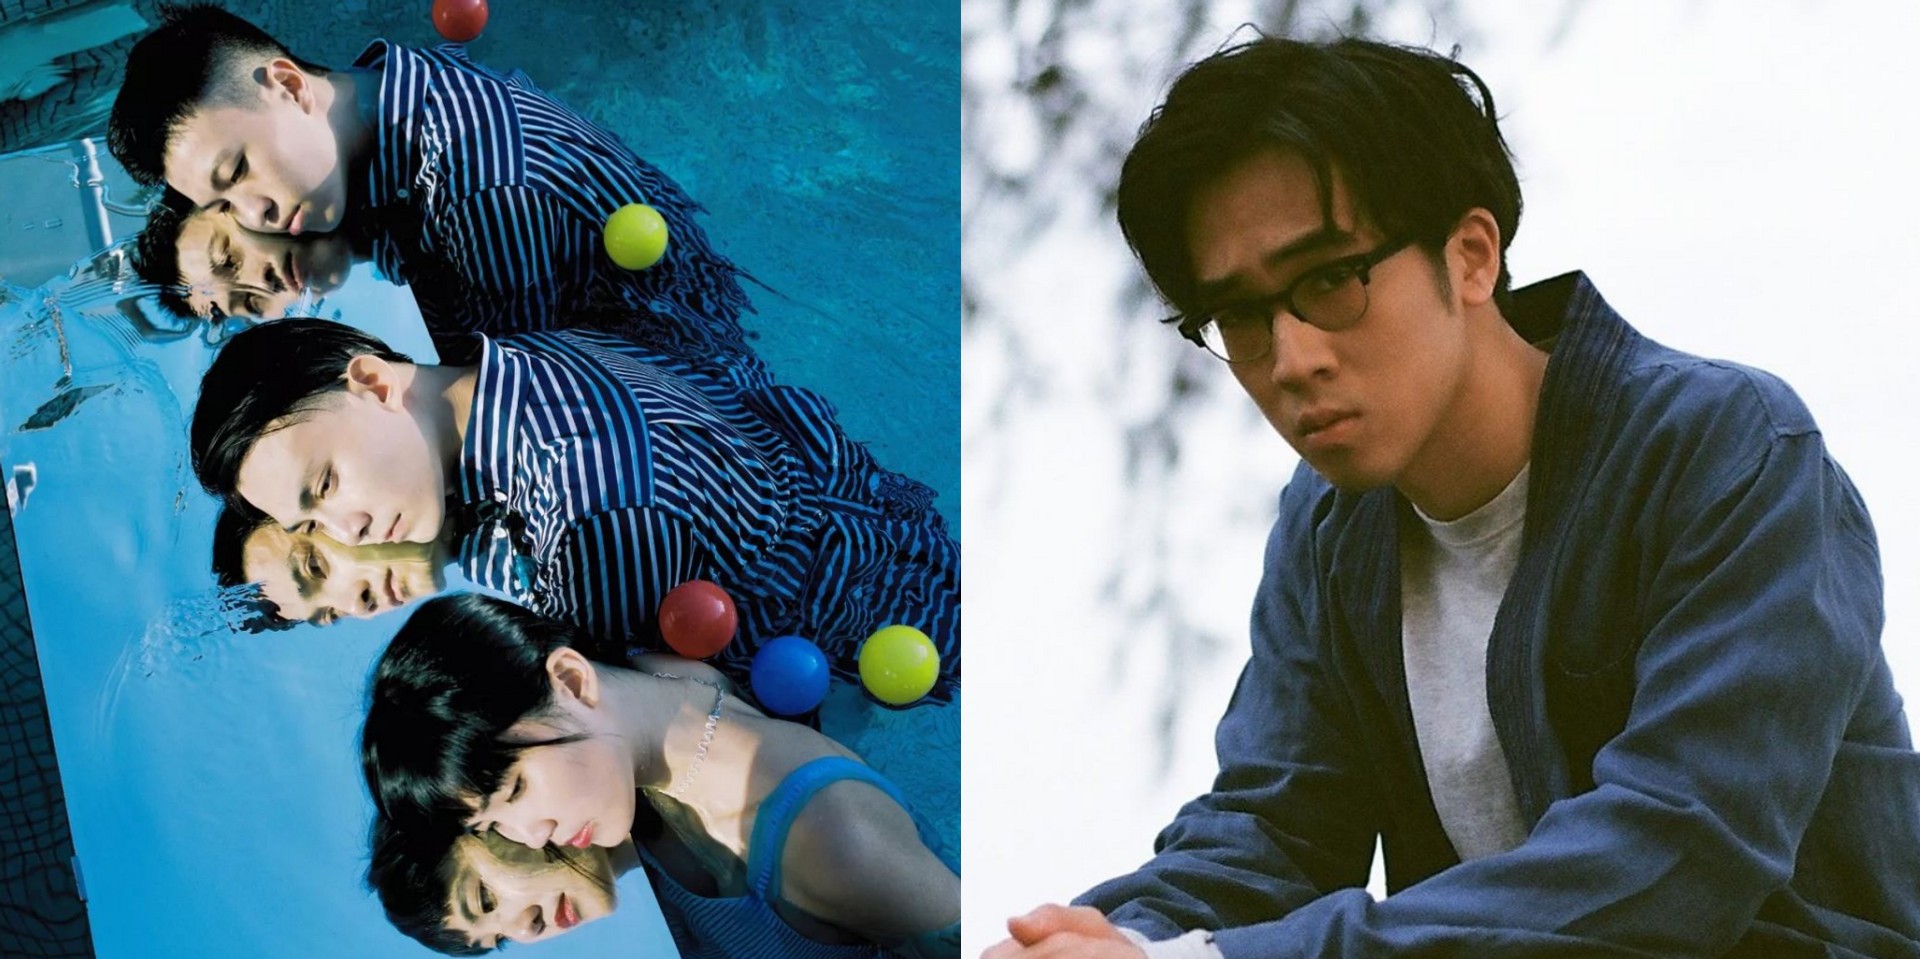 Elephant Gym shares new EP, collaborates with Charlie Lim